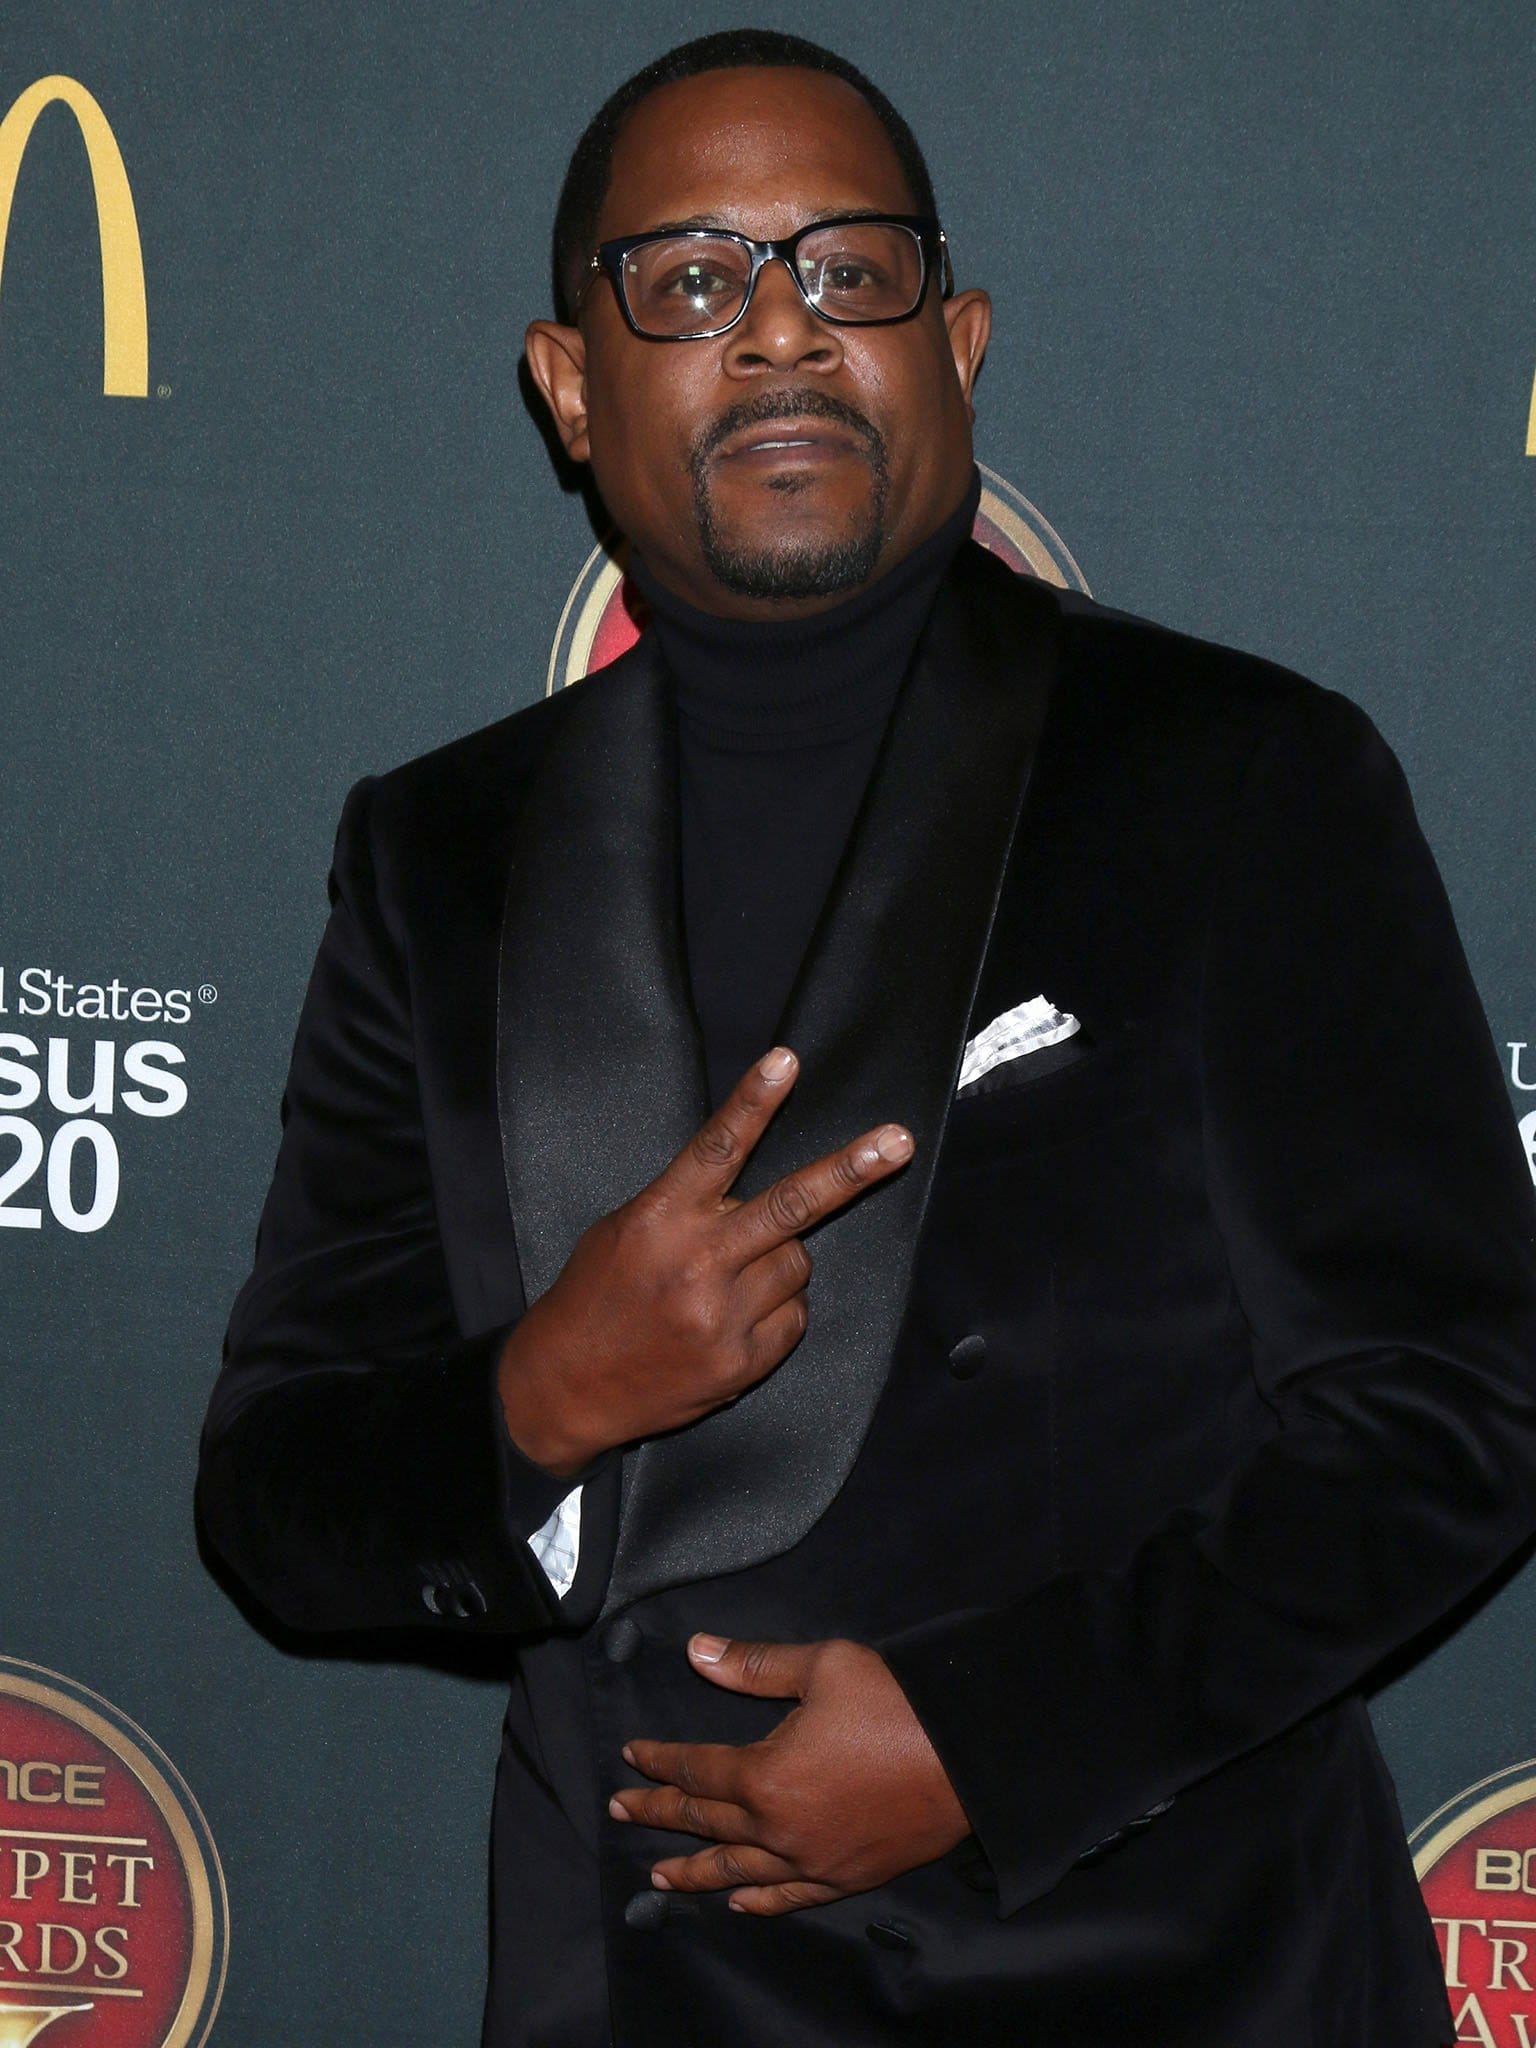 Martin Lawrence got his start playing Maurice Warfield in What's Happening Now!! in 1987, and in 1994, he was banned from NBC after making crude remarks about women's genitalia and personal hygiene